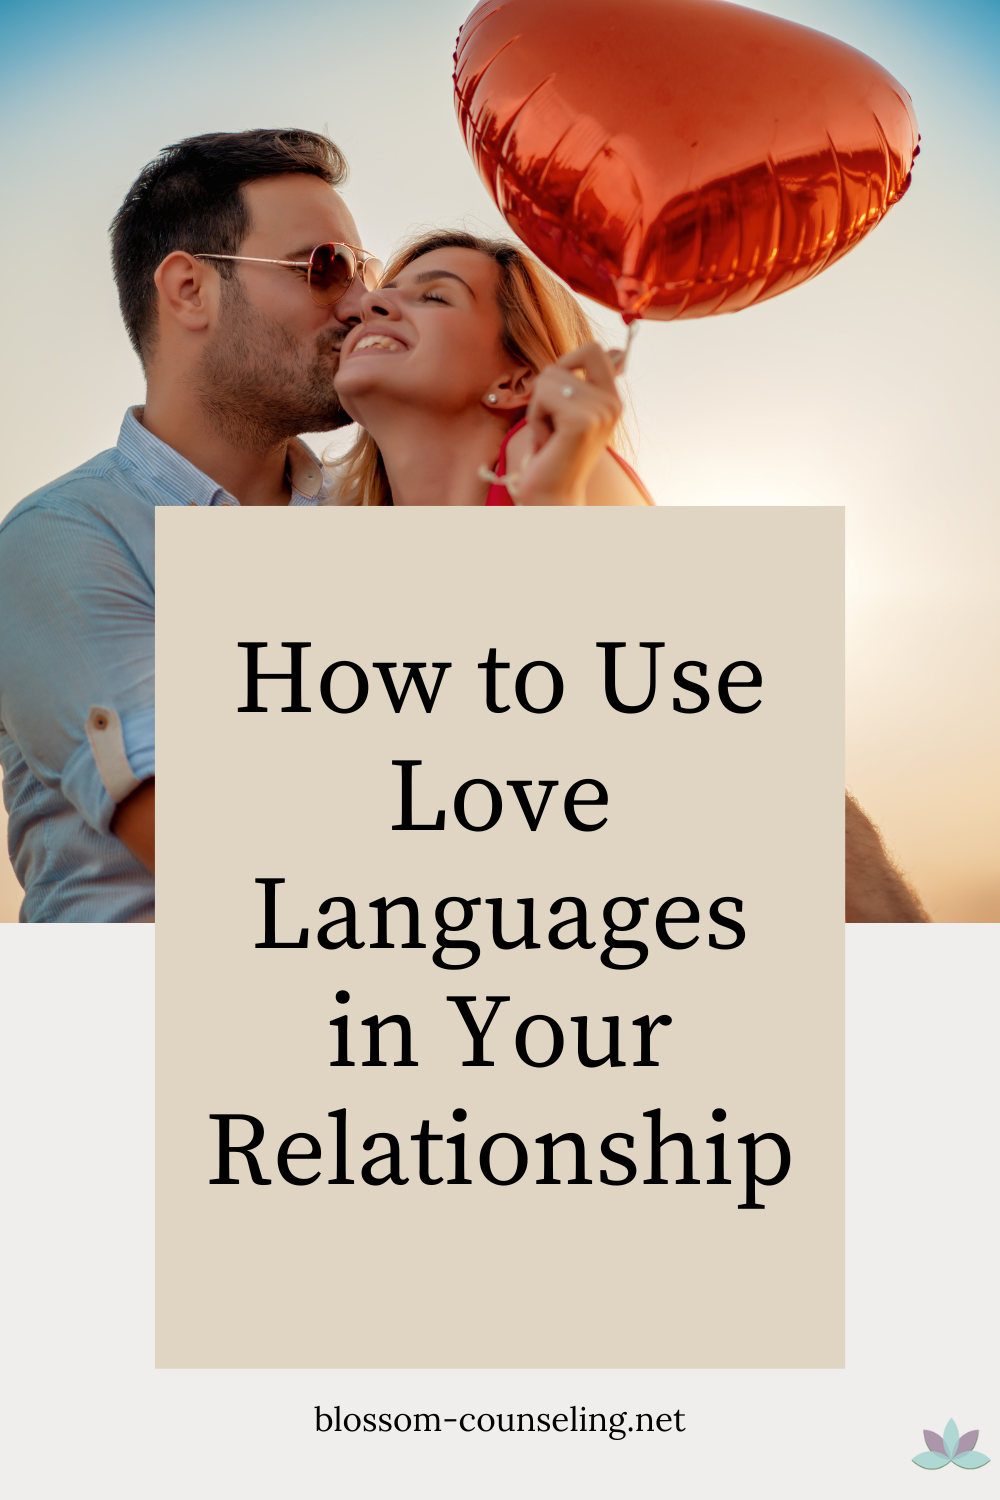 How to Use Love Languages in Your Relationship